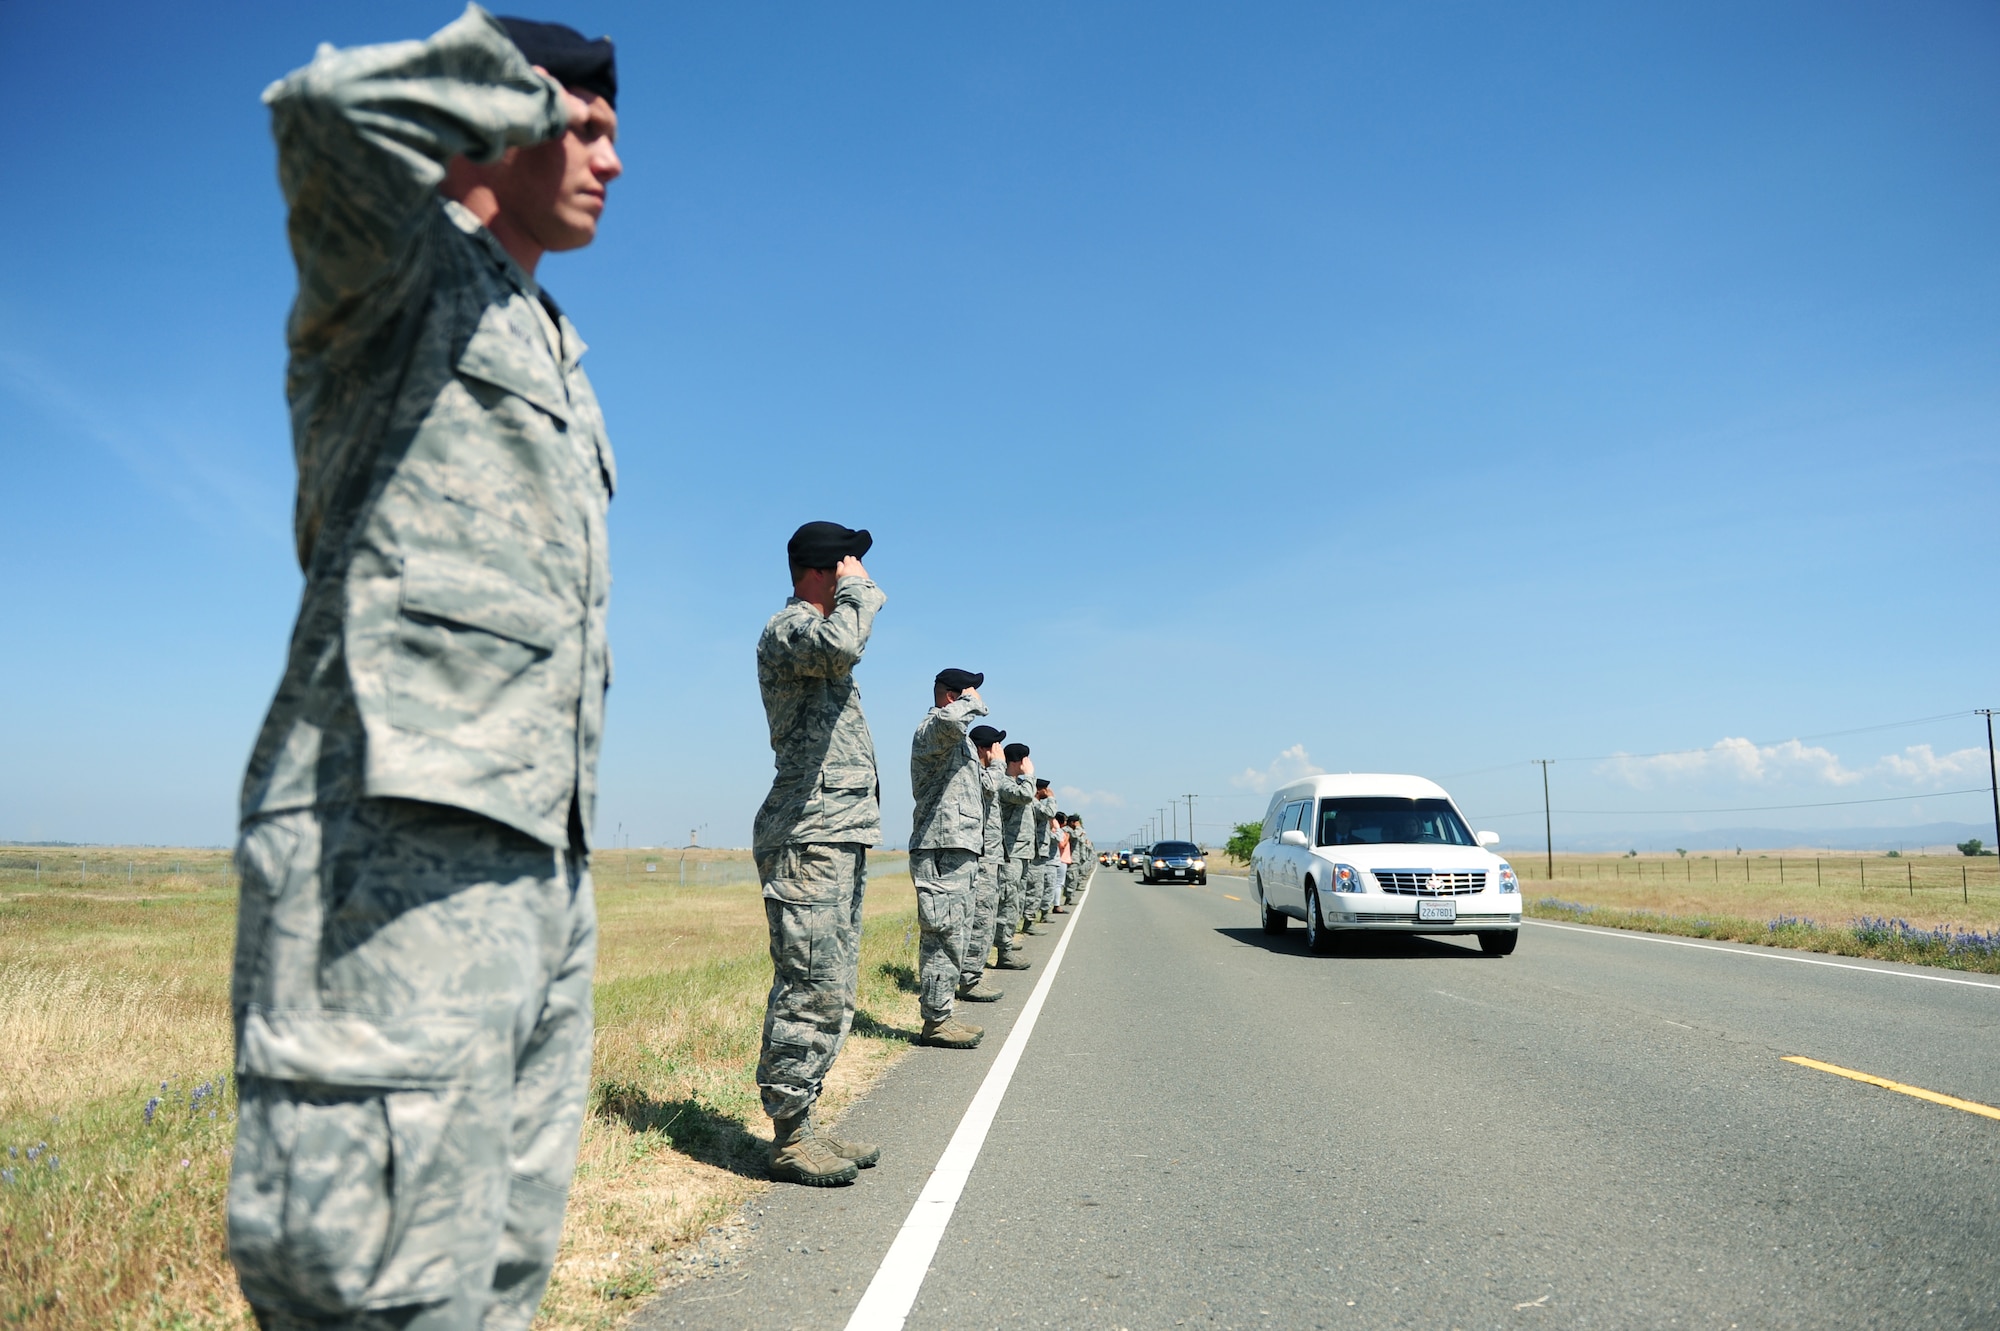 Defenders from the 9th Security Forces Squadron salute the procession of Staff Sgt. Richard Dickson during a dignified transfer at Beale Air Force Base Calif., May 10, 2013. Dickson was killed in a MC-12 Liberty aircraft crash in Afghanistan, April 27. (U.S. Air Force photo by Robert Scott/Released)